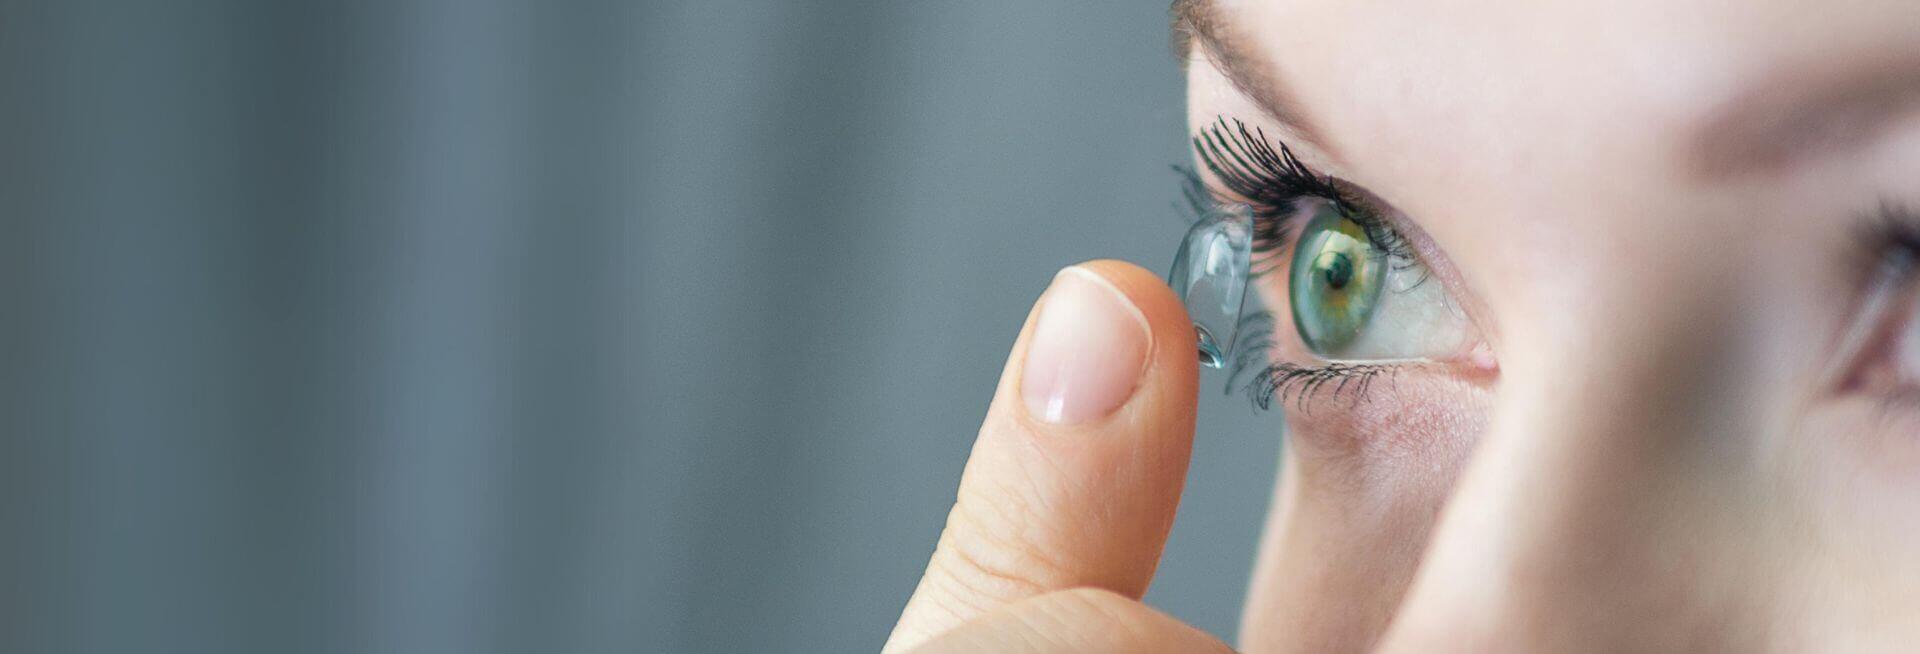 CE Certification For Contact Lenses